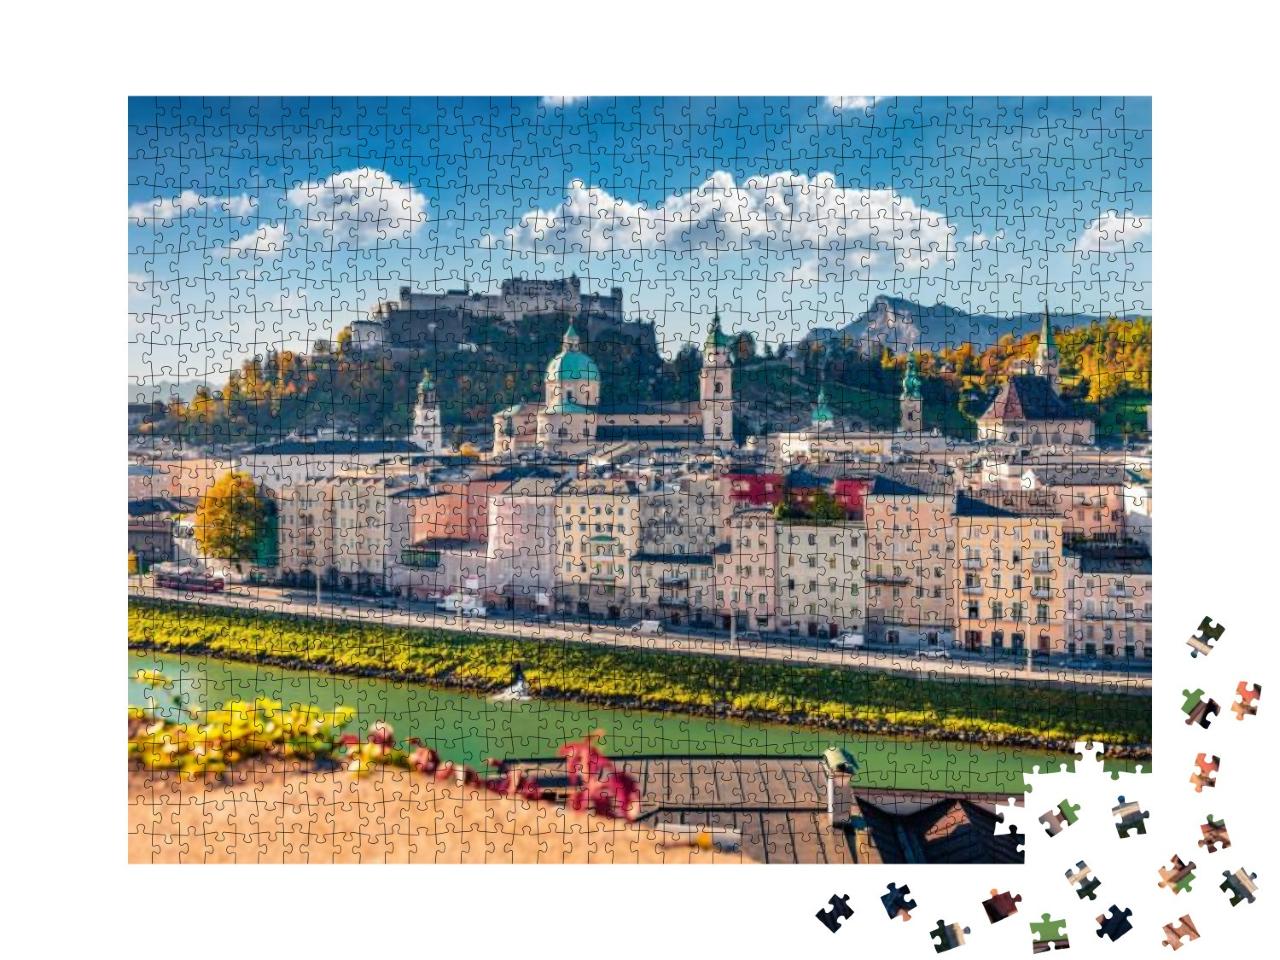 Captivating Cityscape of Salzburg, Old City, Birthplace o... Jigsaw Puzzle with 1000 pieces